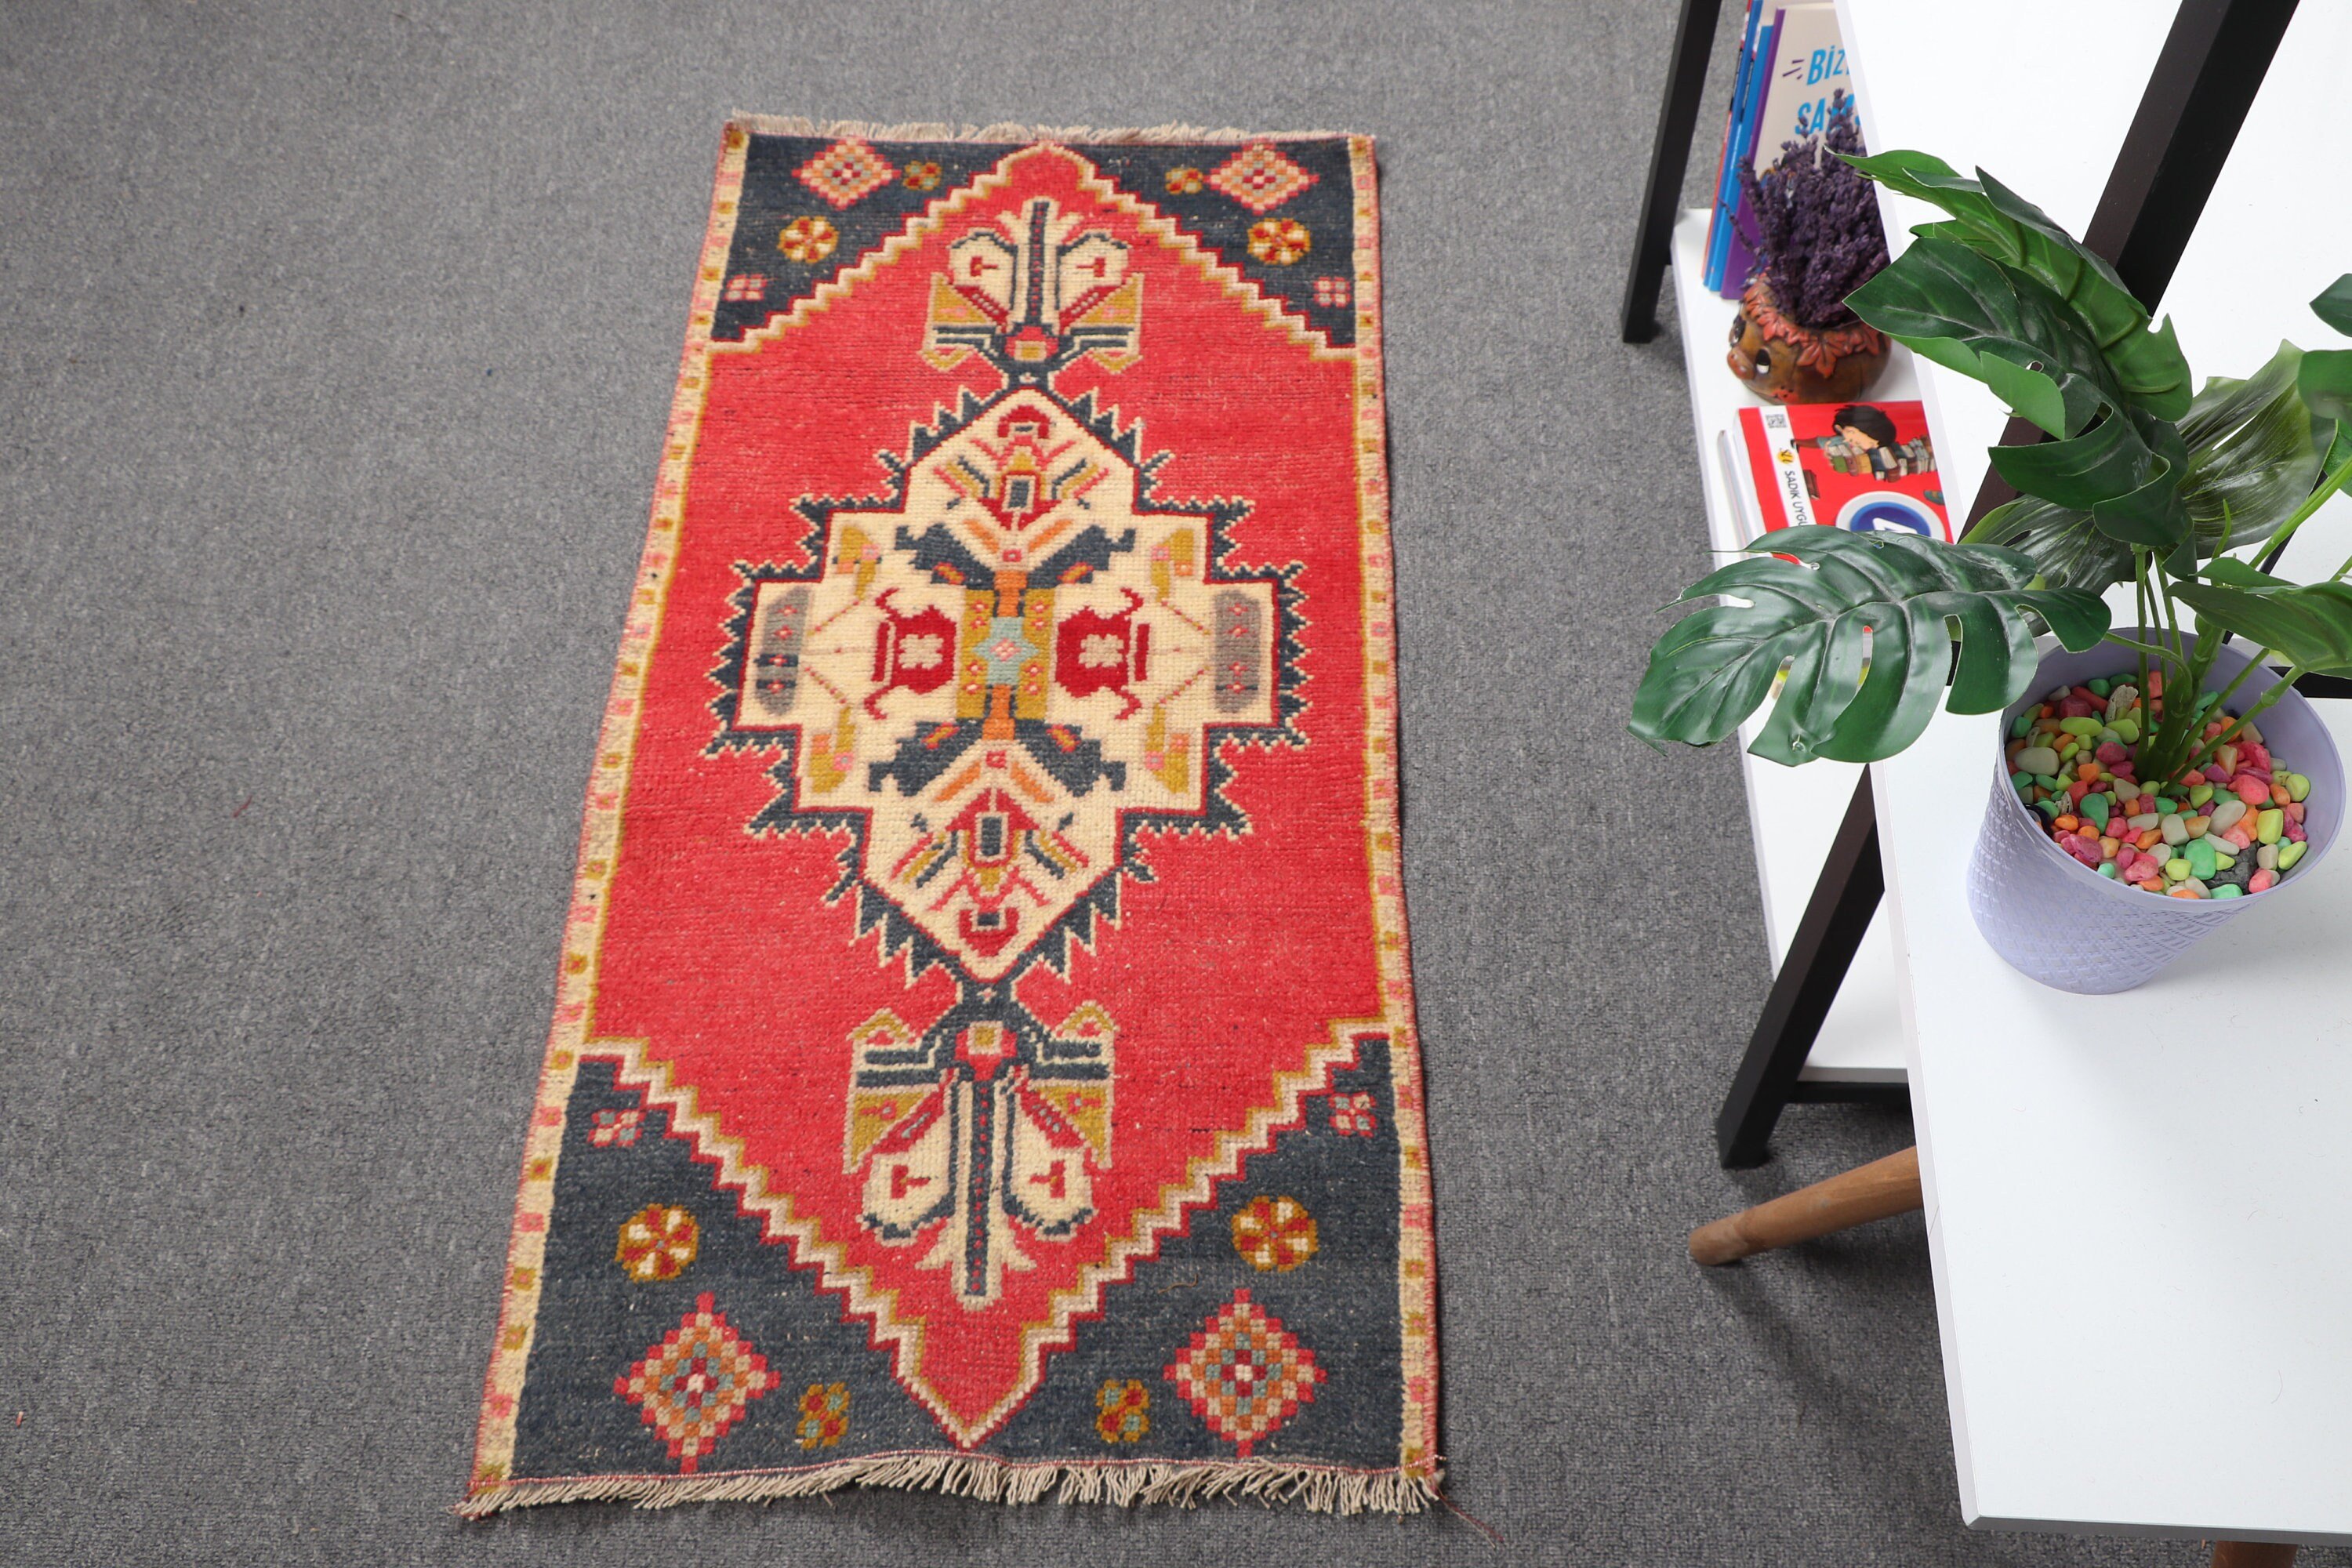 Vintage Rugs, Floor Rugs, Turkish Rugs, Car Mat Rug, Moroccan Rug, Wall Hanging Rug, 1.7x3.5 ft Small Rug, Bright Rugs, Red Kitchen Rugs